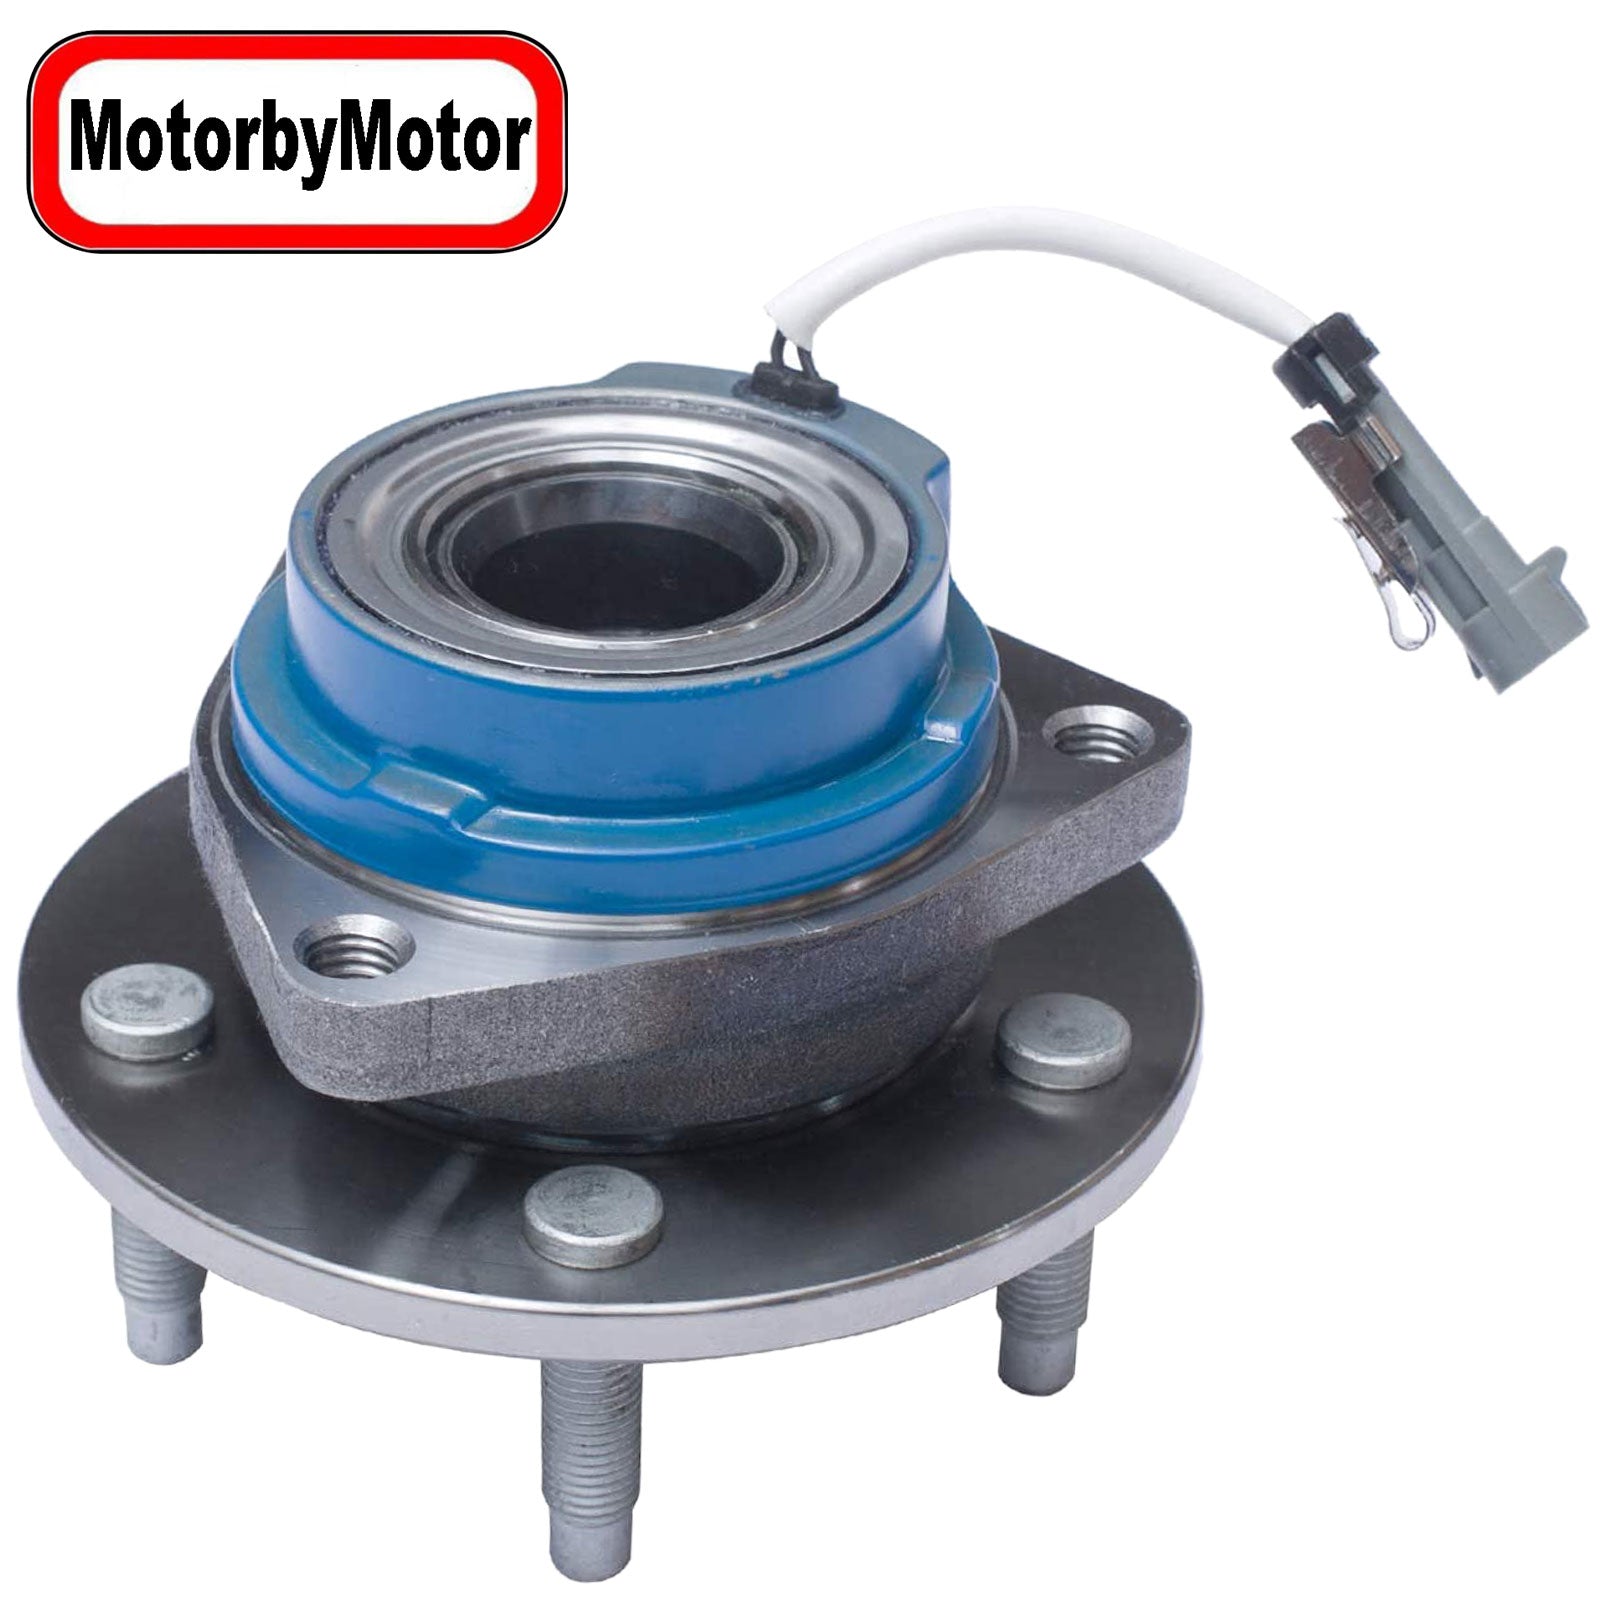 MotorbyMotor 512223 Rear Wheel Bearing and Hub Assembly with 5 Lugs, 2003-2007 Cadillac CTS, 2005-2011 Cadillac STS Low-Runout OE Directly Replacement w/ABS MotorbyMotor